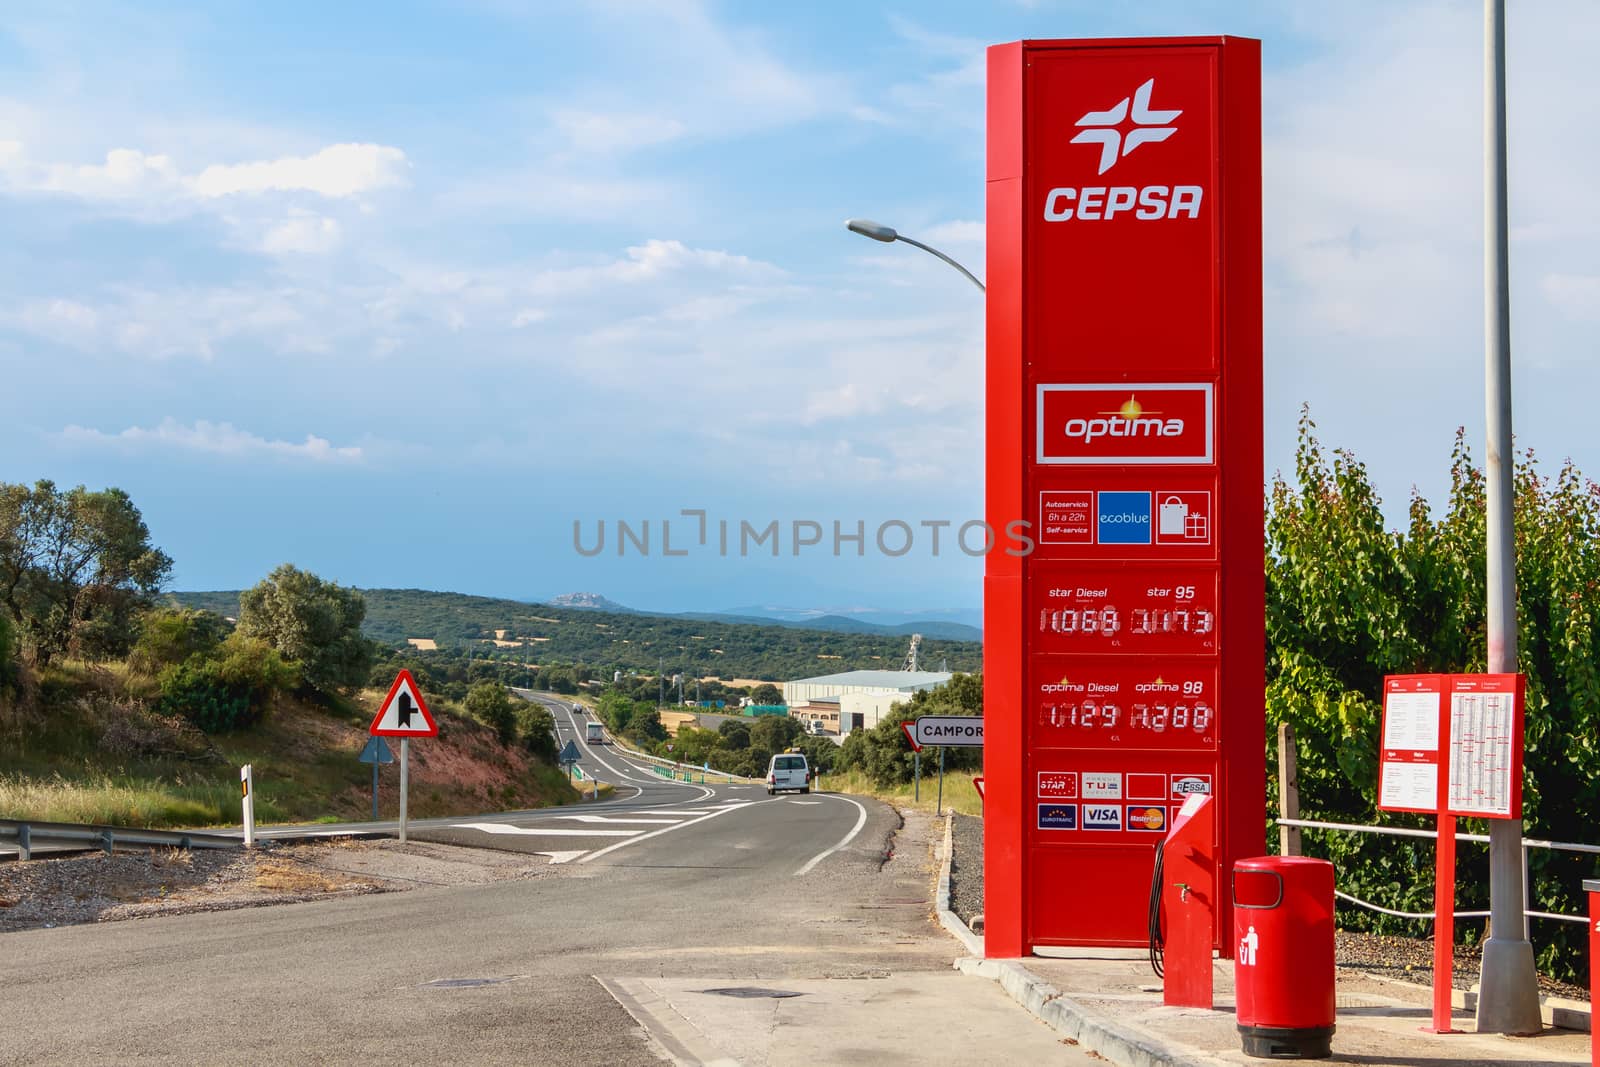 Huesca, Spain - June 21, 2017 : detail of a CEPSA gas station on a small country road with its price panels and fuel pumps at the end of the day